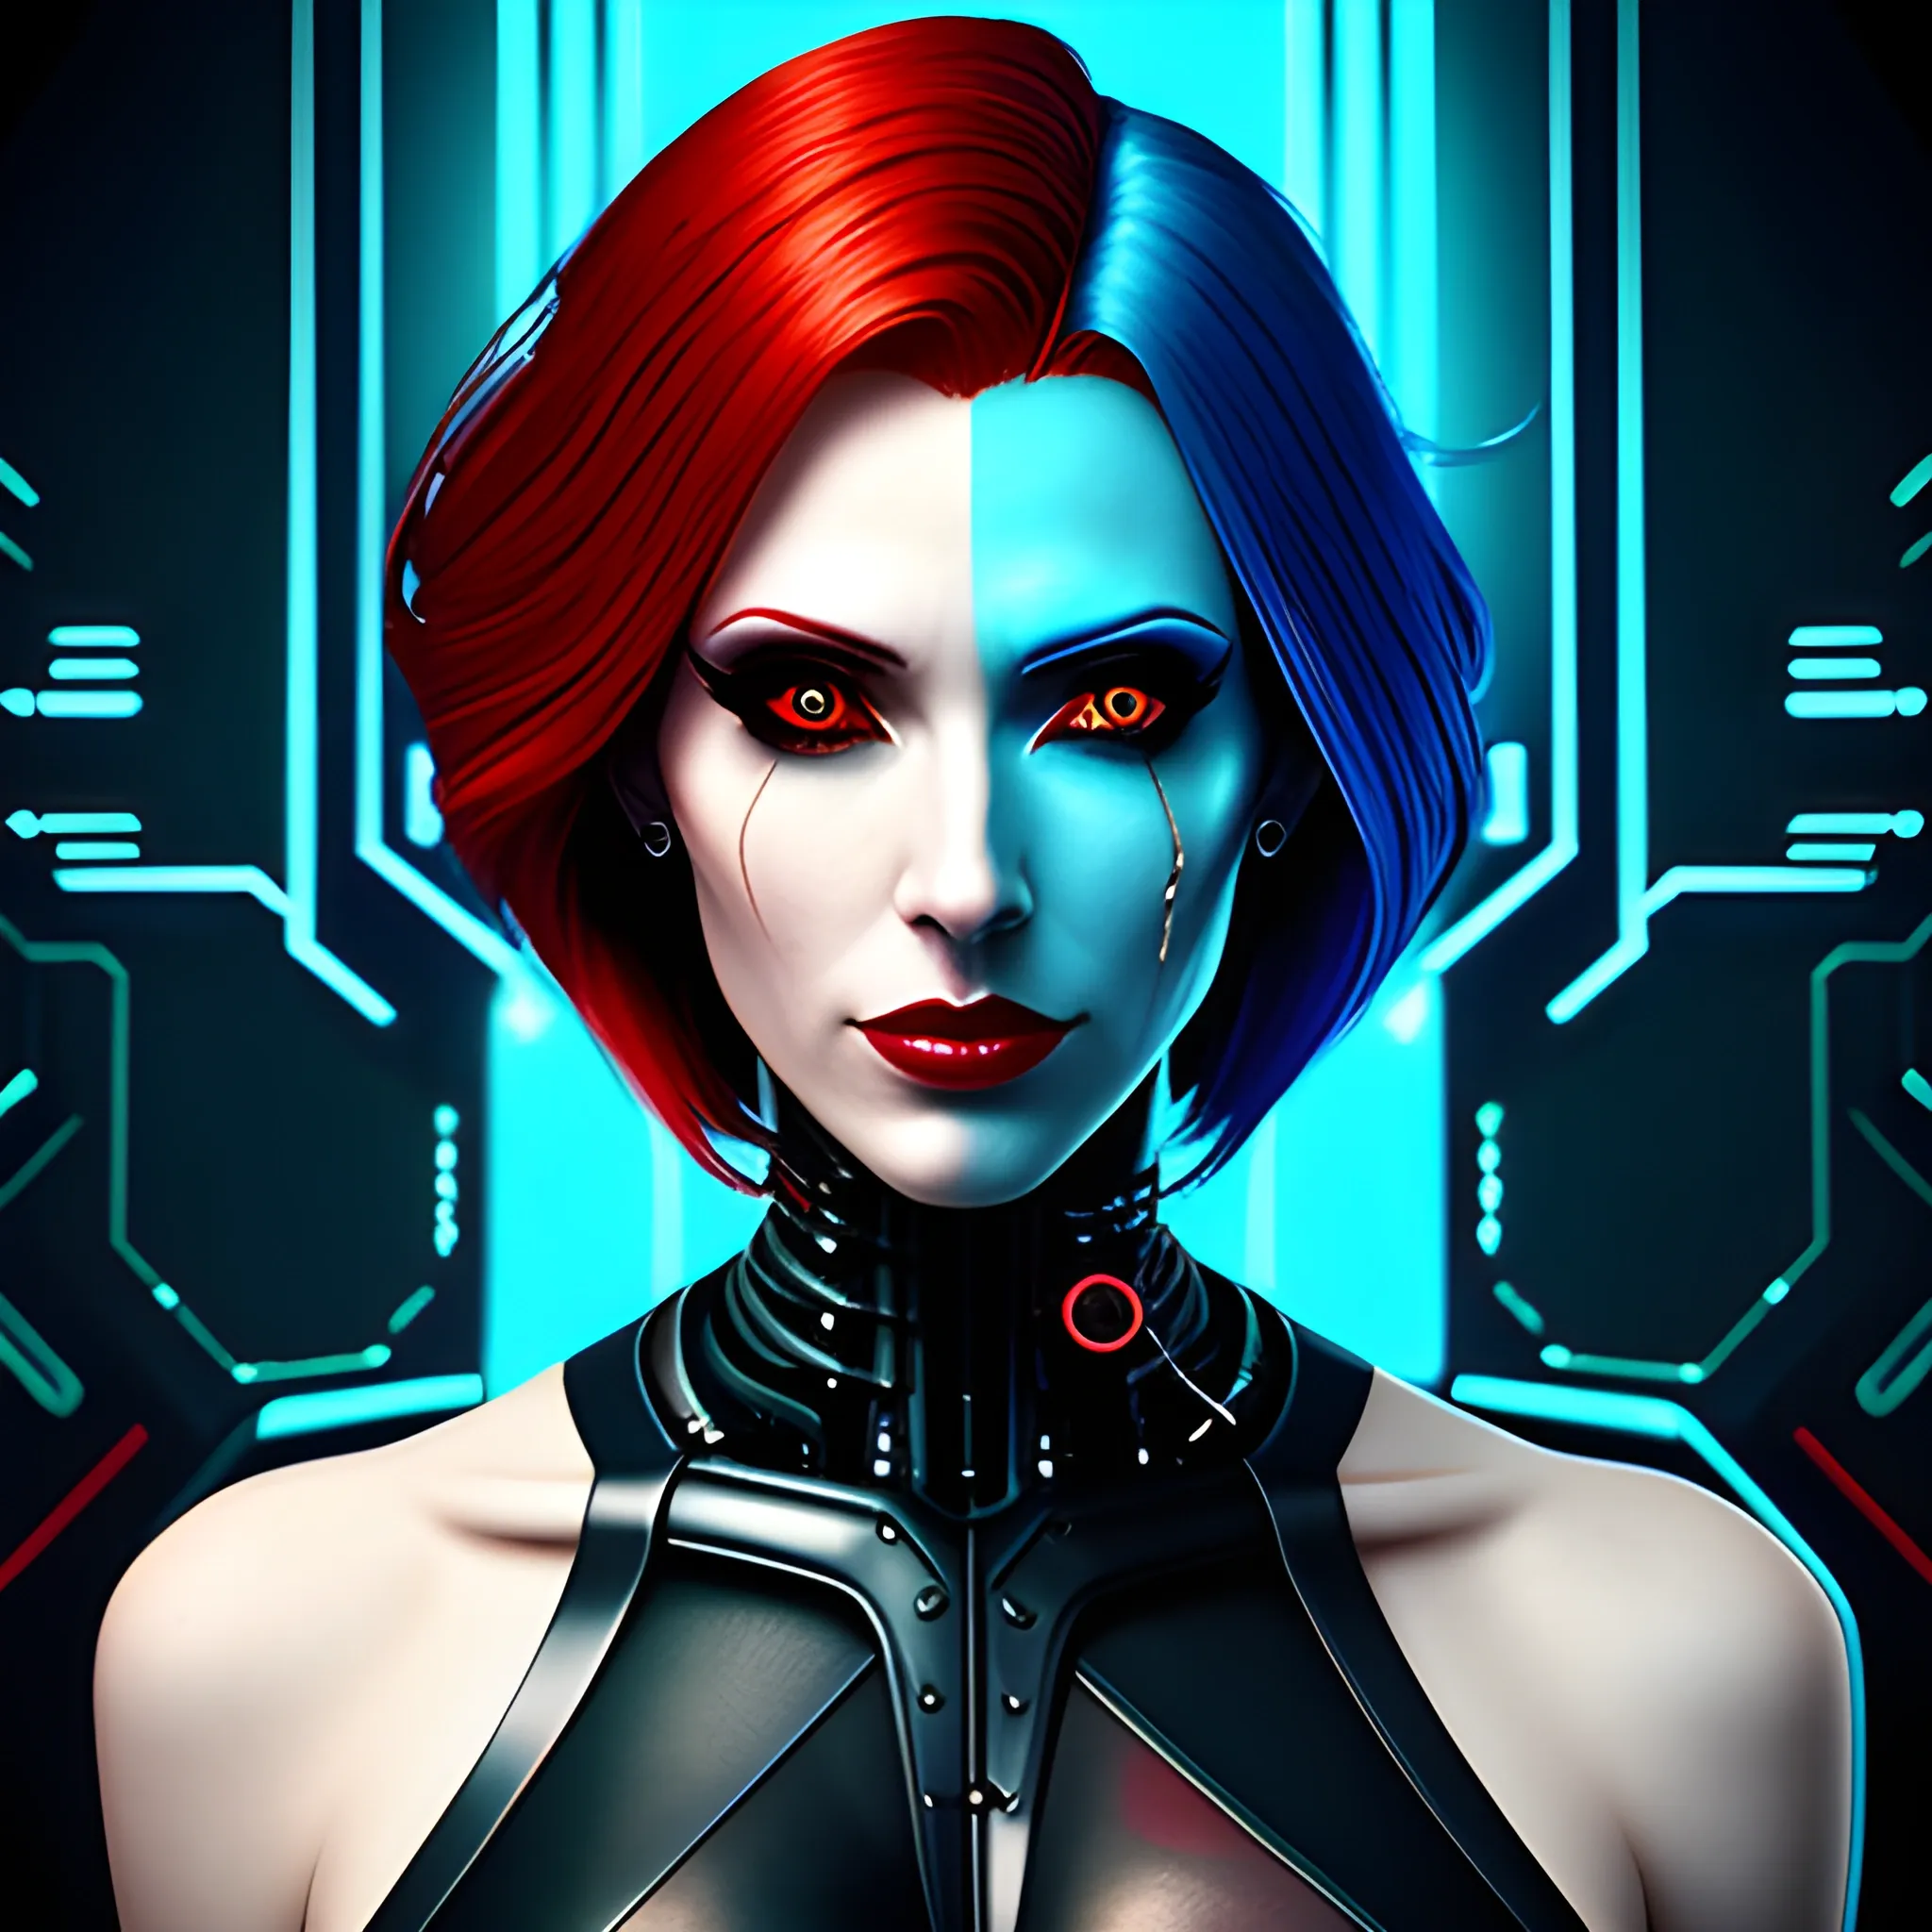 Cyberpunk girl, girl with red hair, dim lights, blue and black tones style, surreal